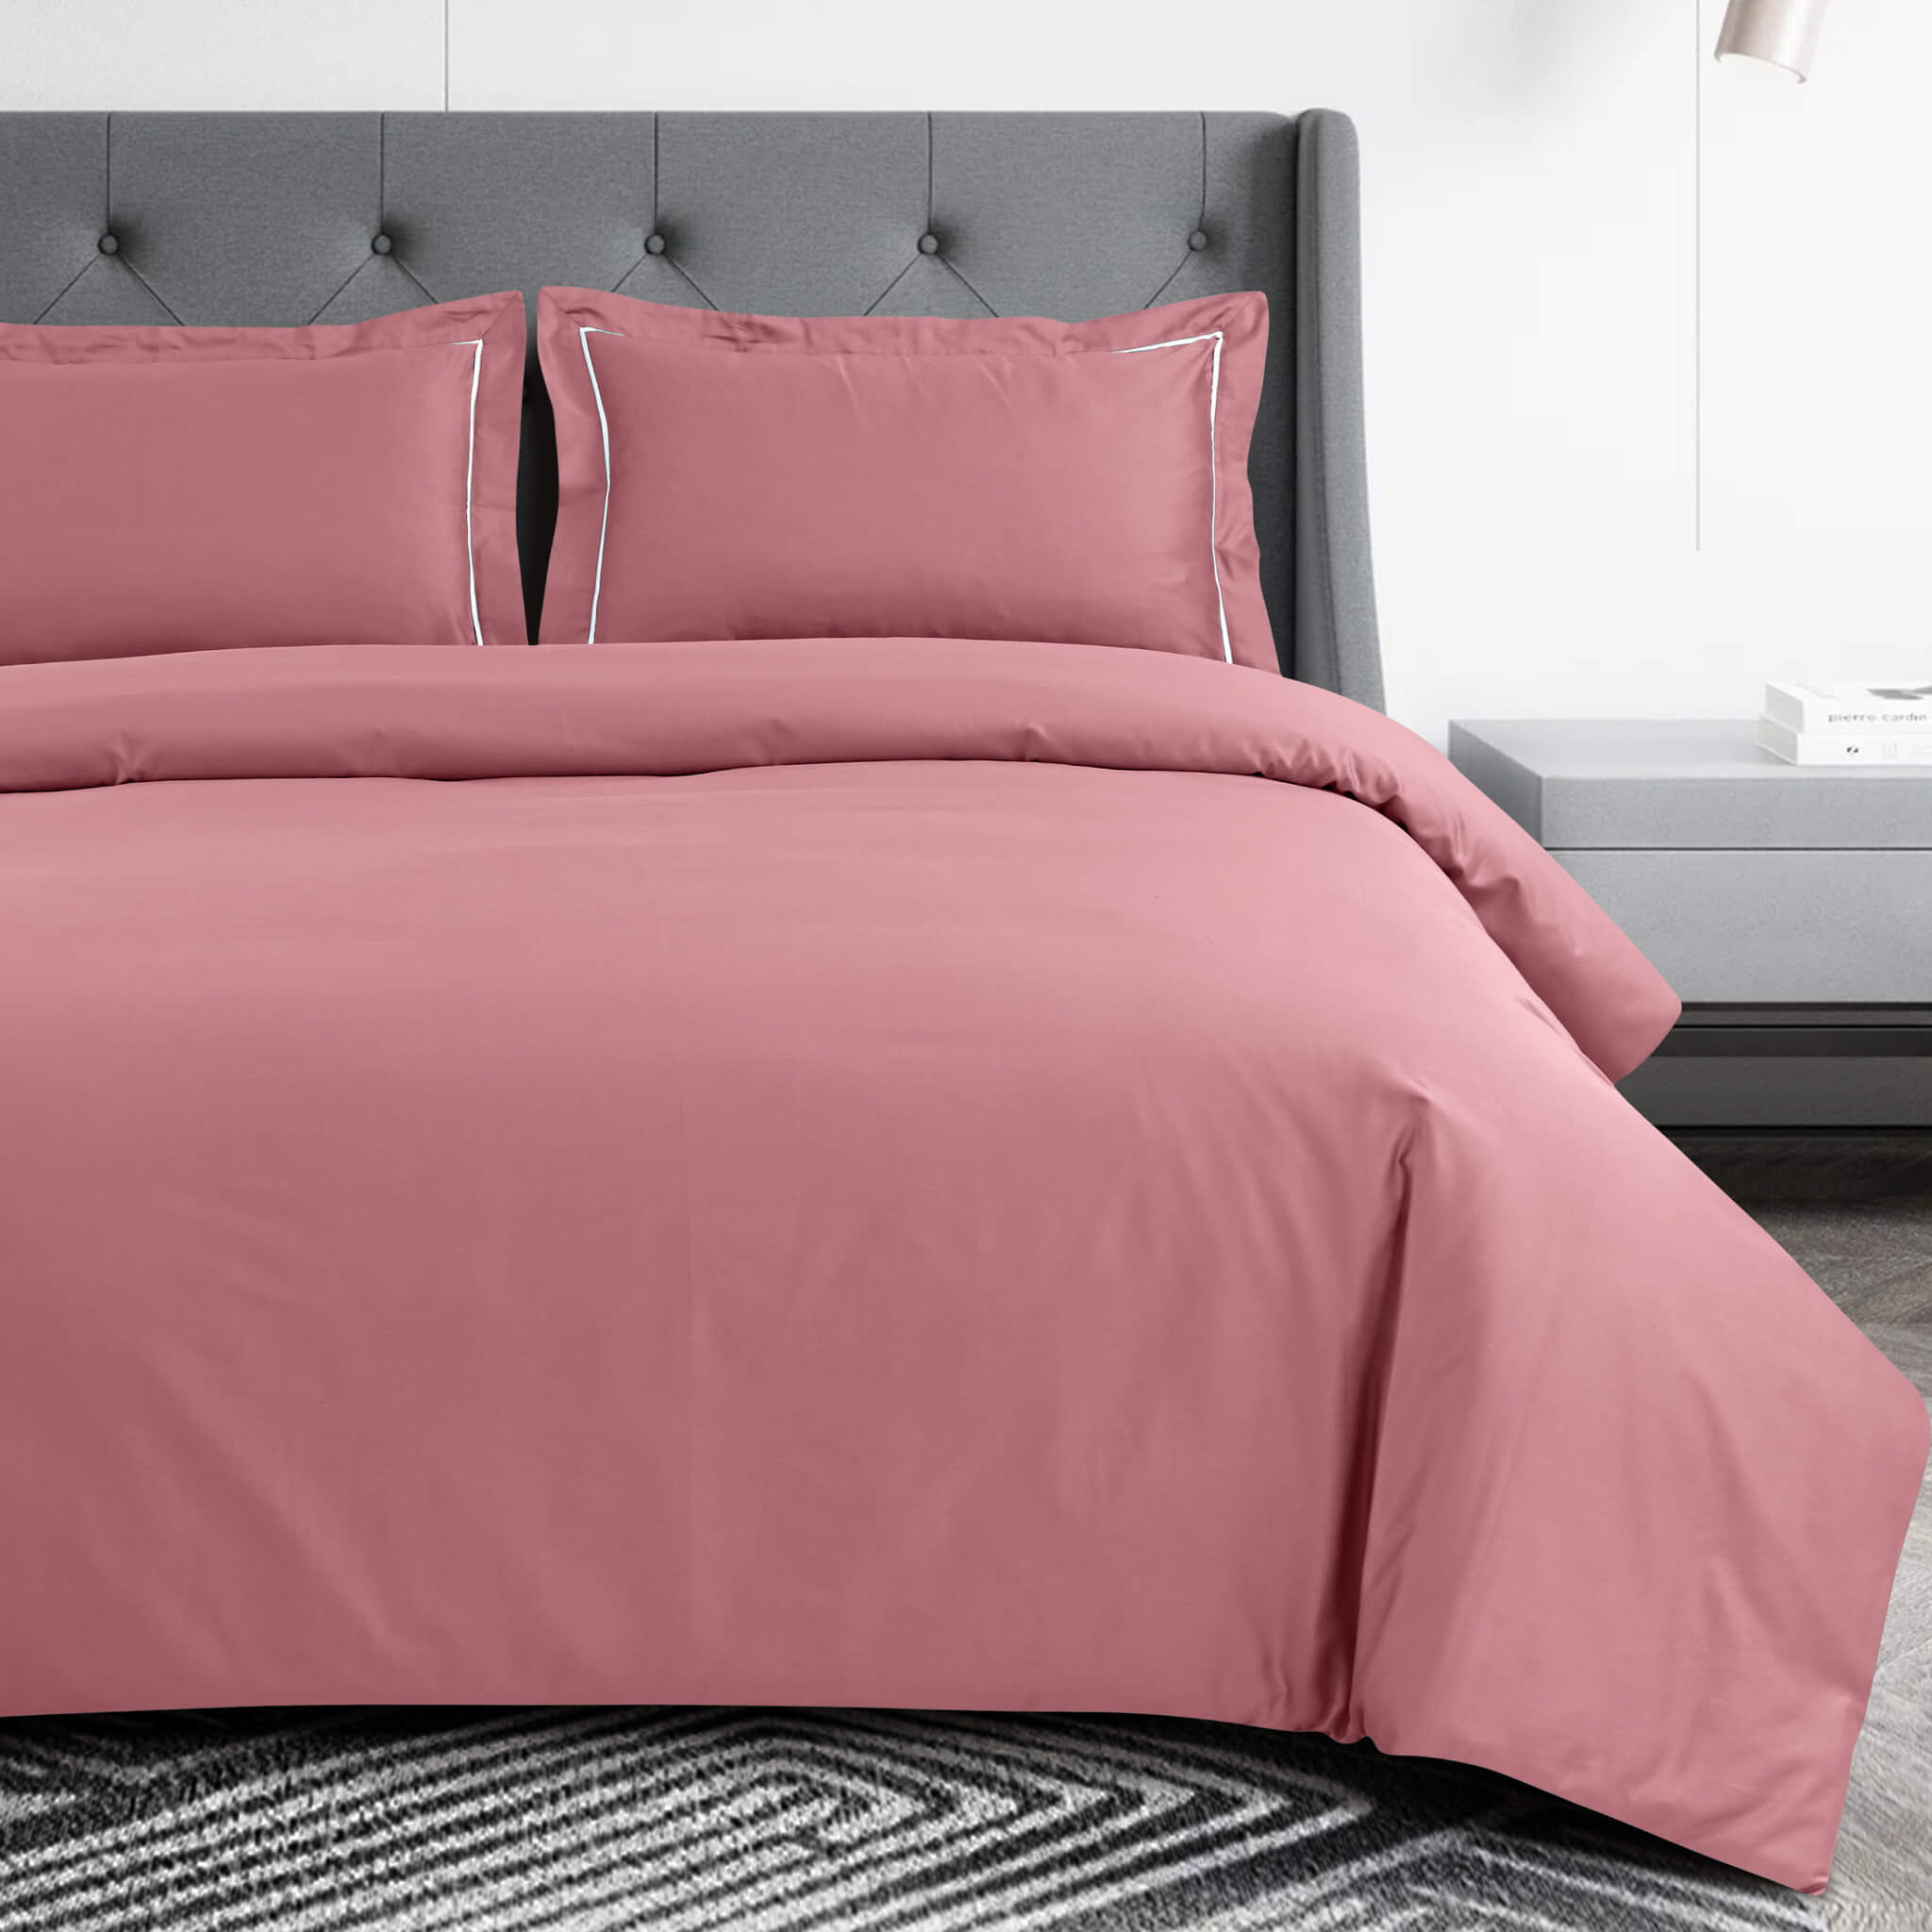 Malako Vibrant Solid Rose Pink 500 TC King Size 100% Cotton Bed Sheet With 2 Plain Pillow Covers - MALAKO